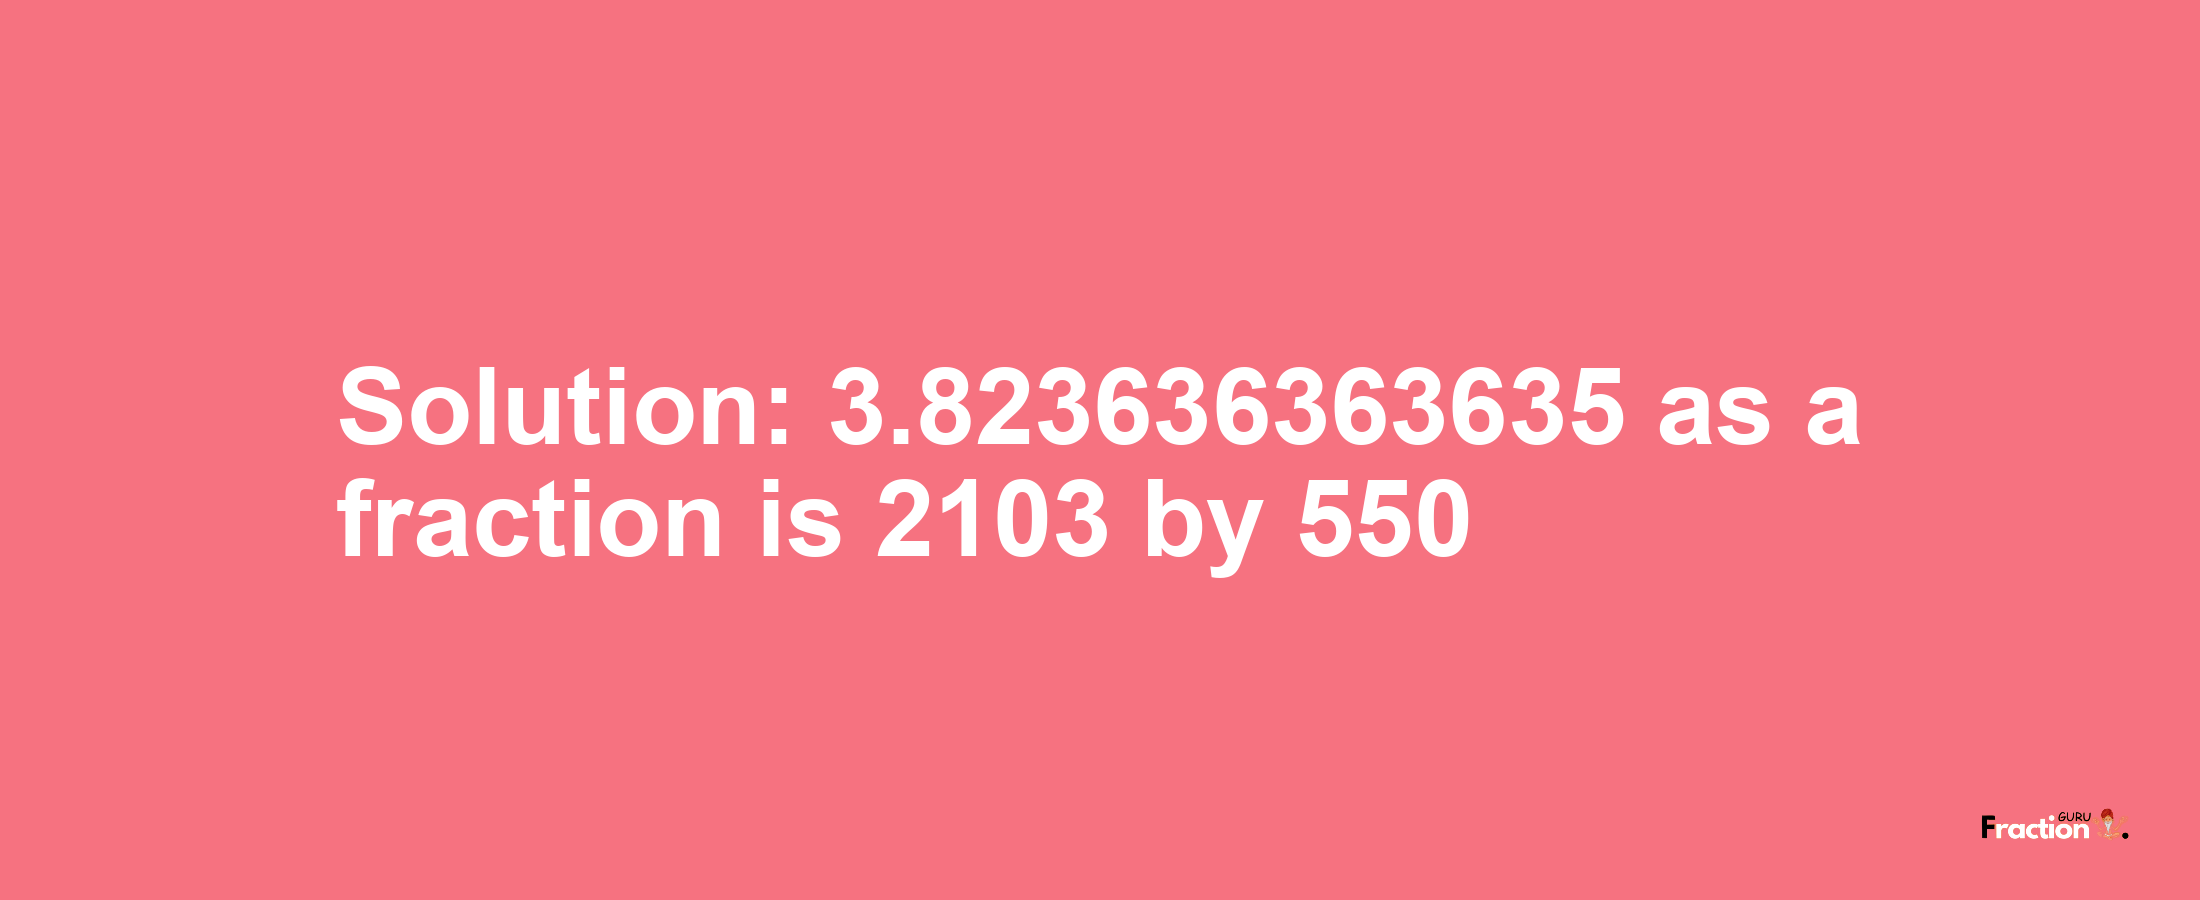 Solution:3.823636363635 as a fraction is 2103/550